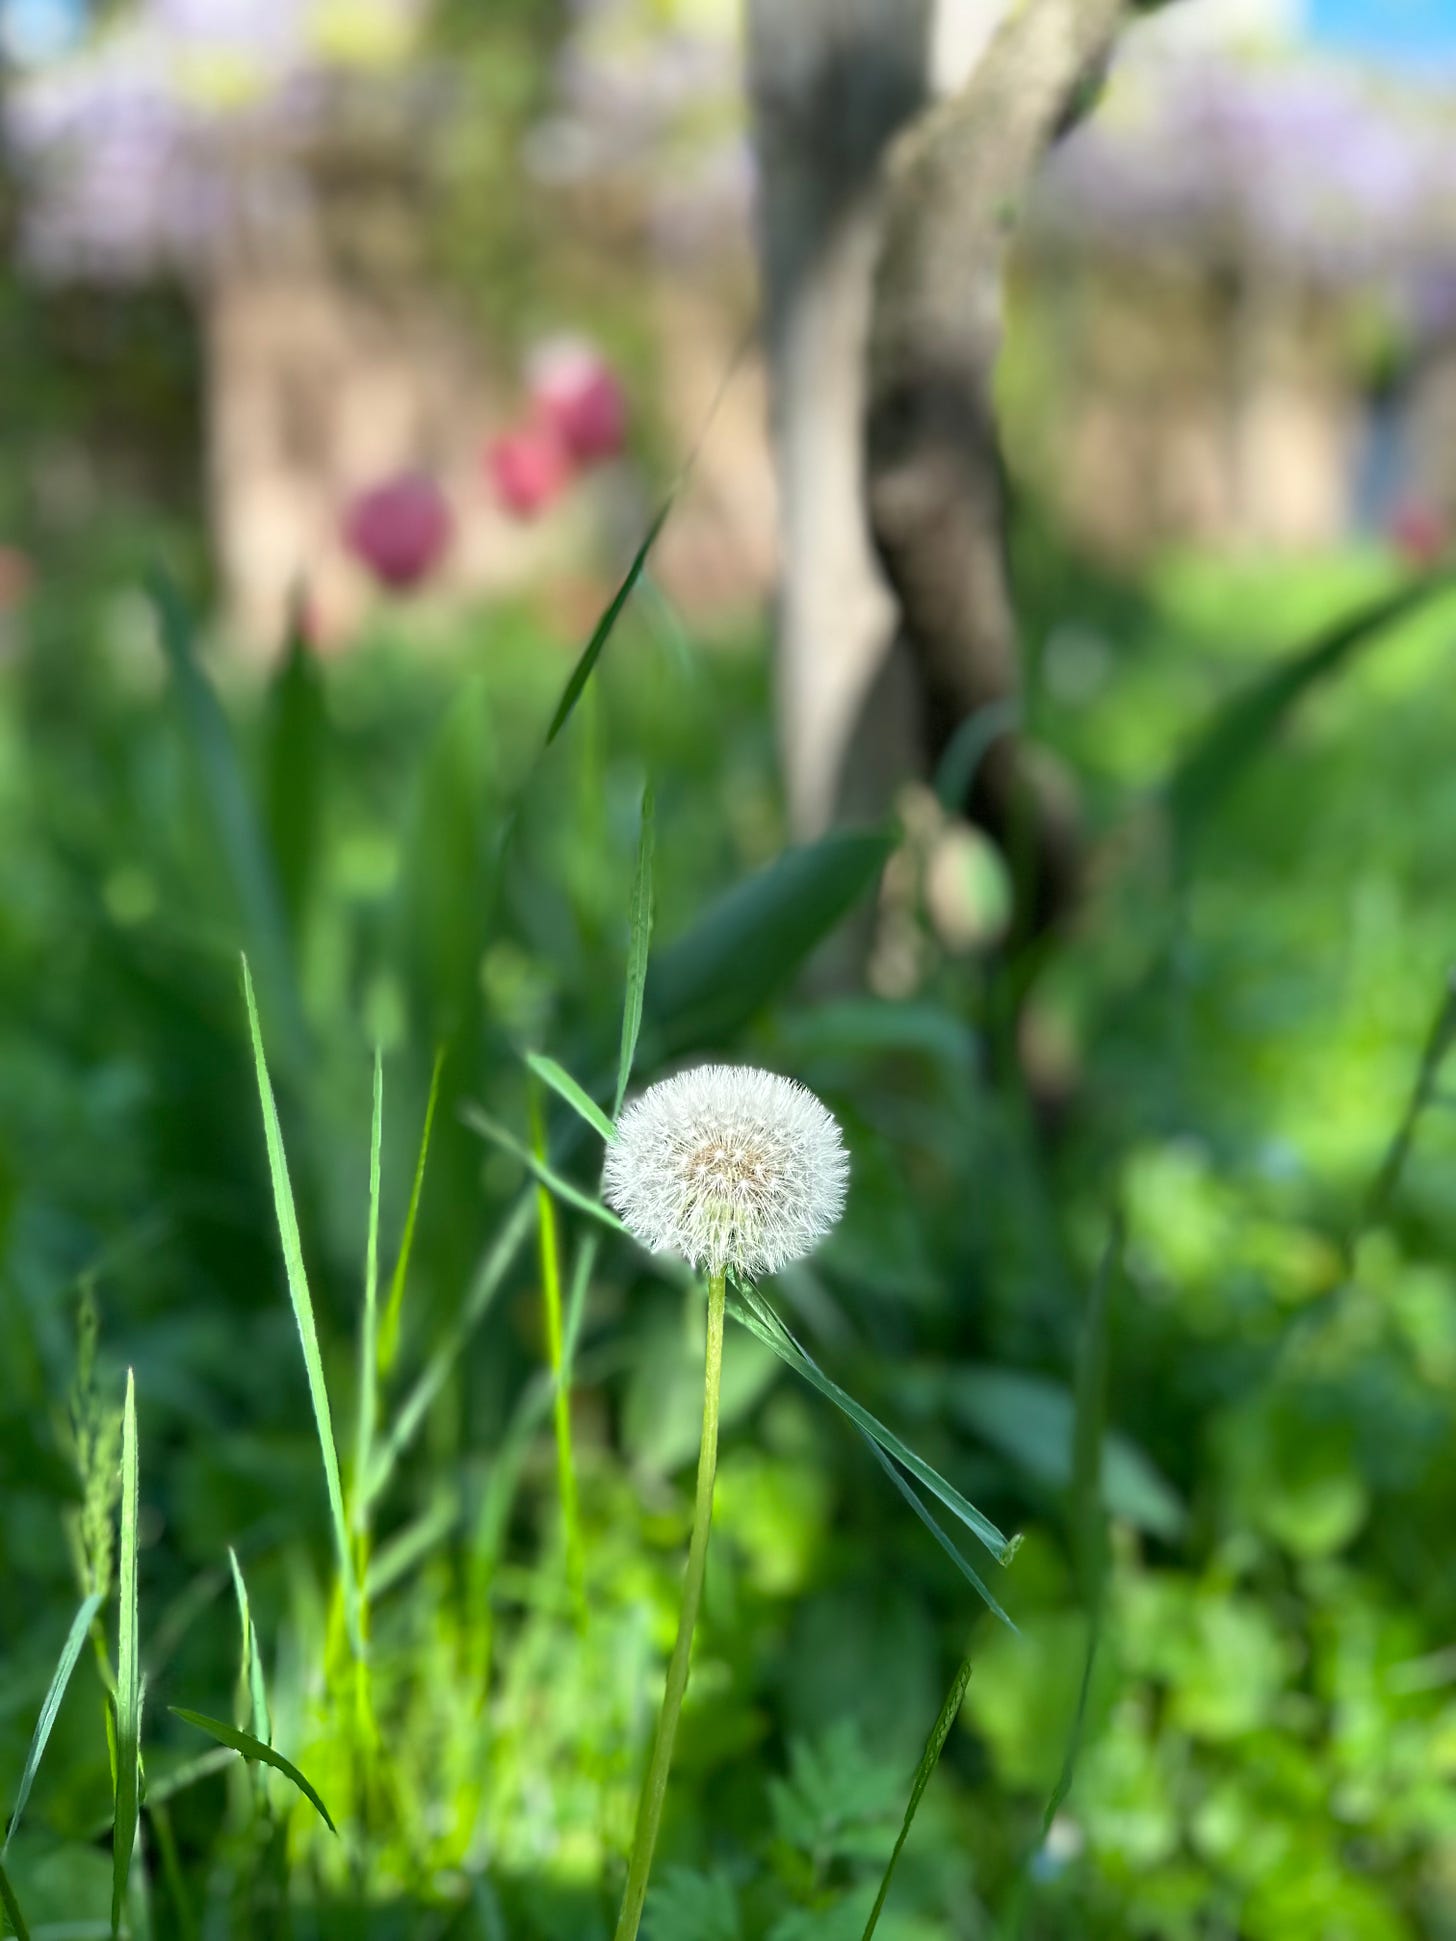 A dandelion clock and blurred tulips